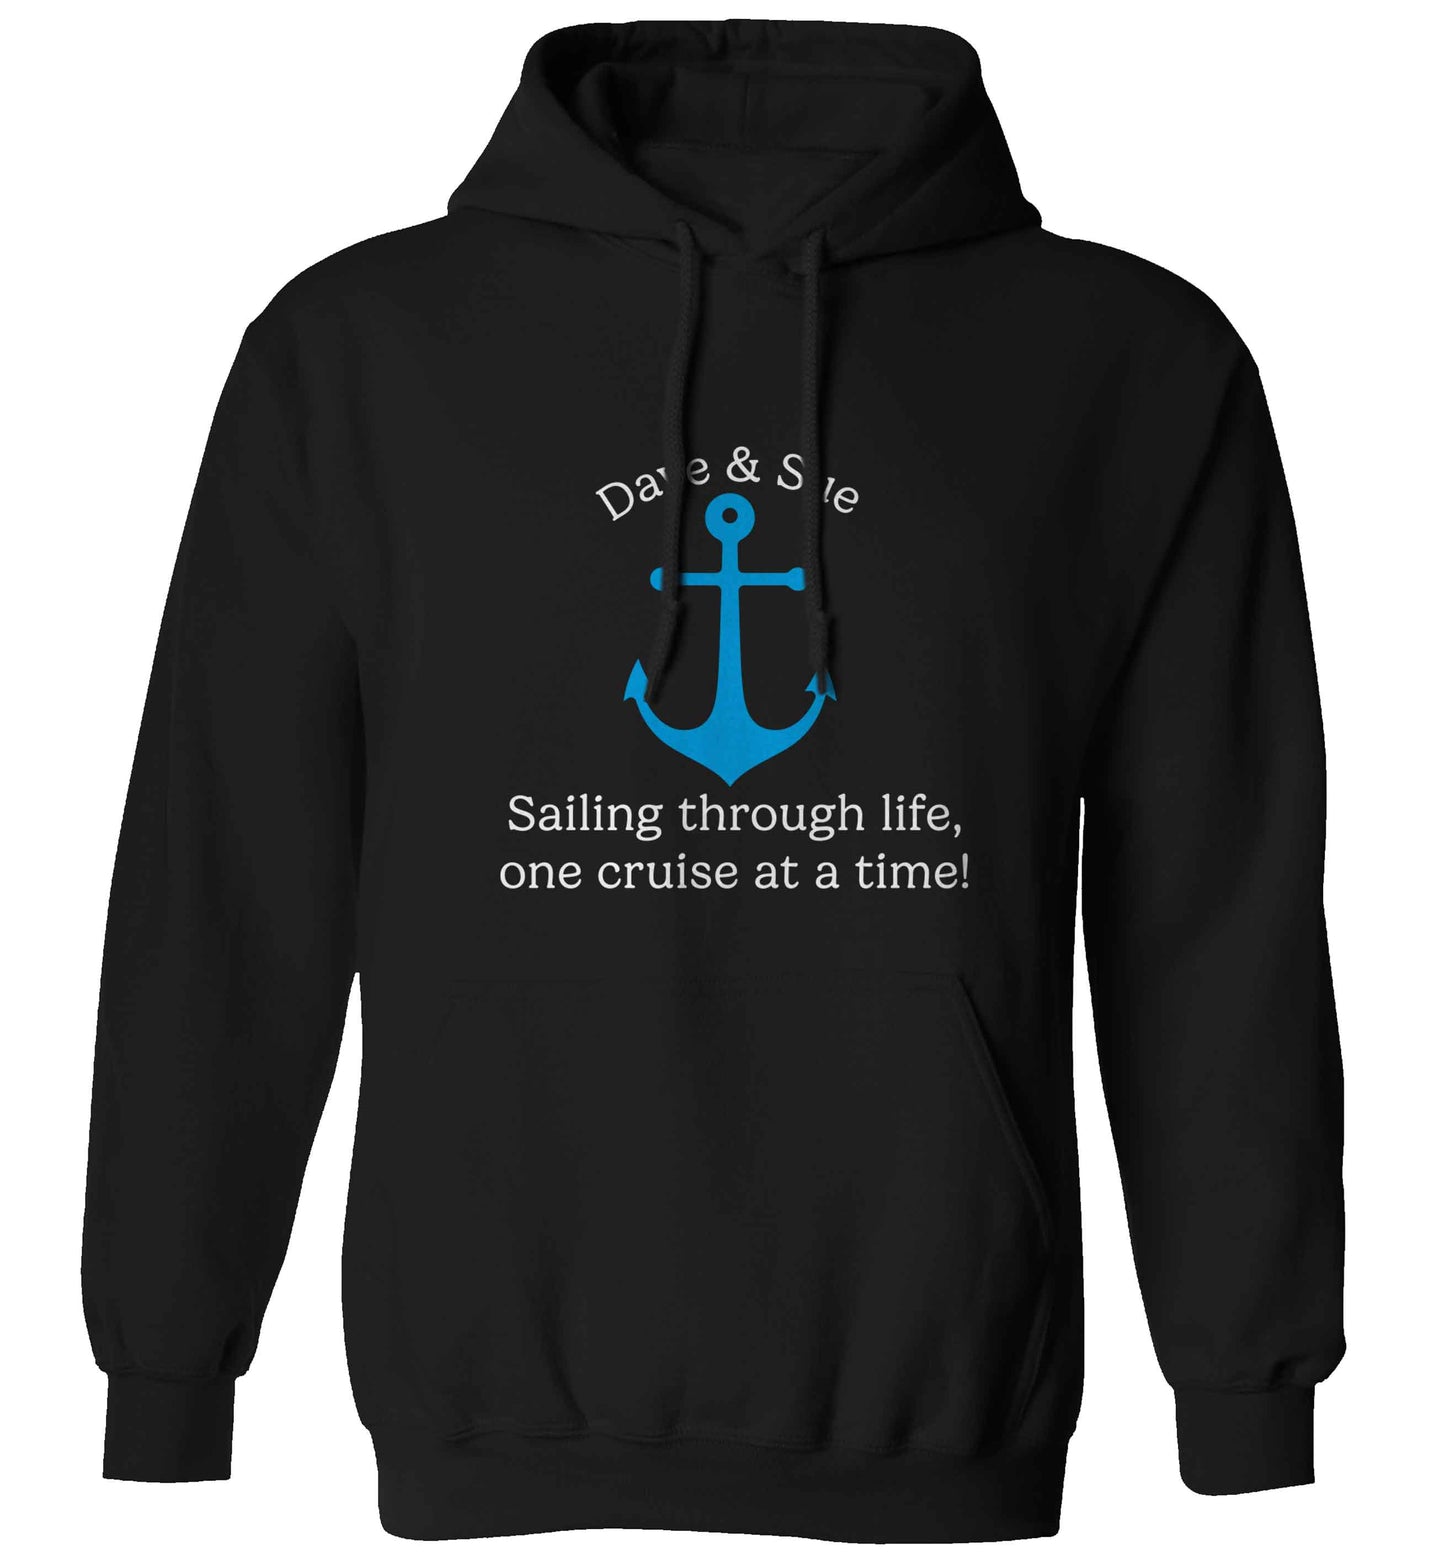 Sailing through life one cruise at a time - personalised adults unisex black hoodie 2XL